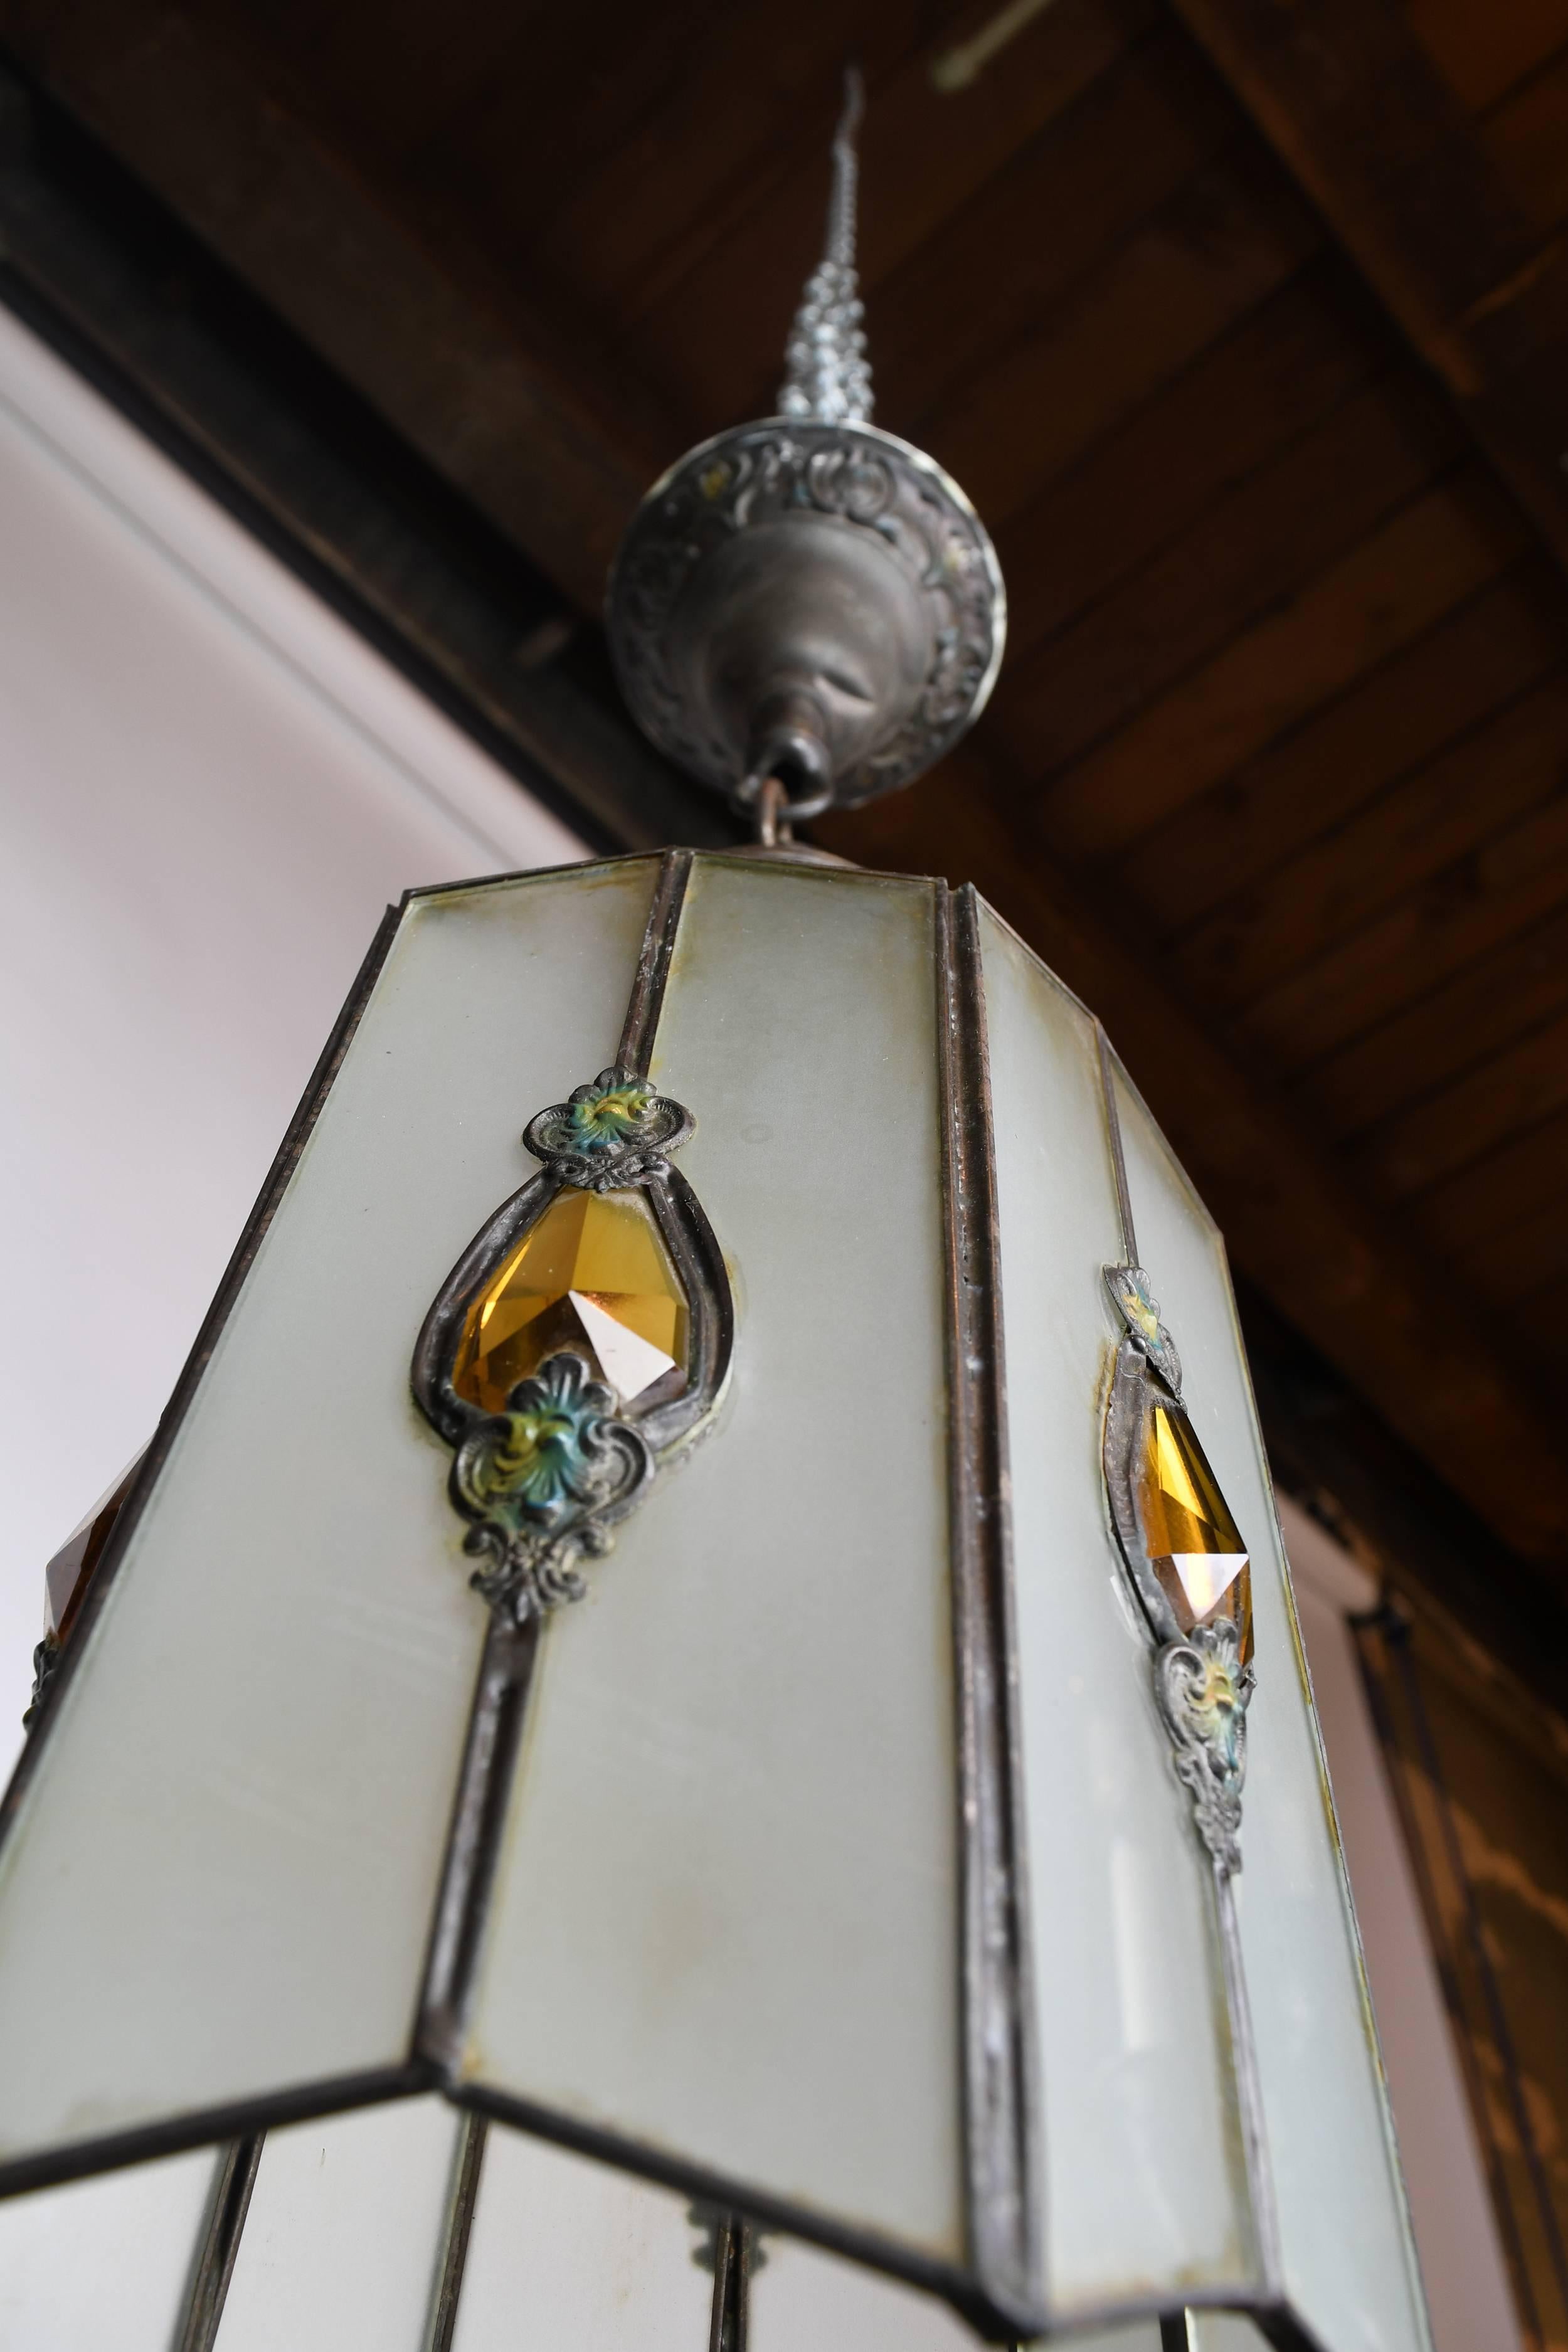 This pendant has a delicate, Arts & Crafts and Gothic influenced design, decorated with amber-colored glass teardrops on all six sides of the glass shades. The canopy and holder are ornamented with acanthus motifs.

We find that early antique